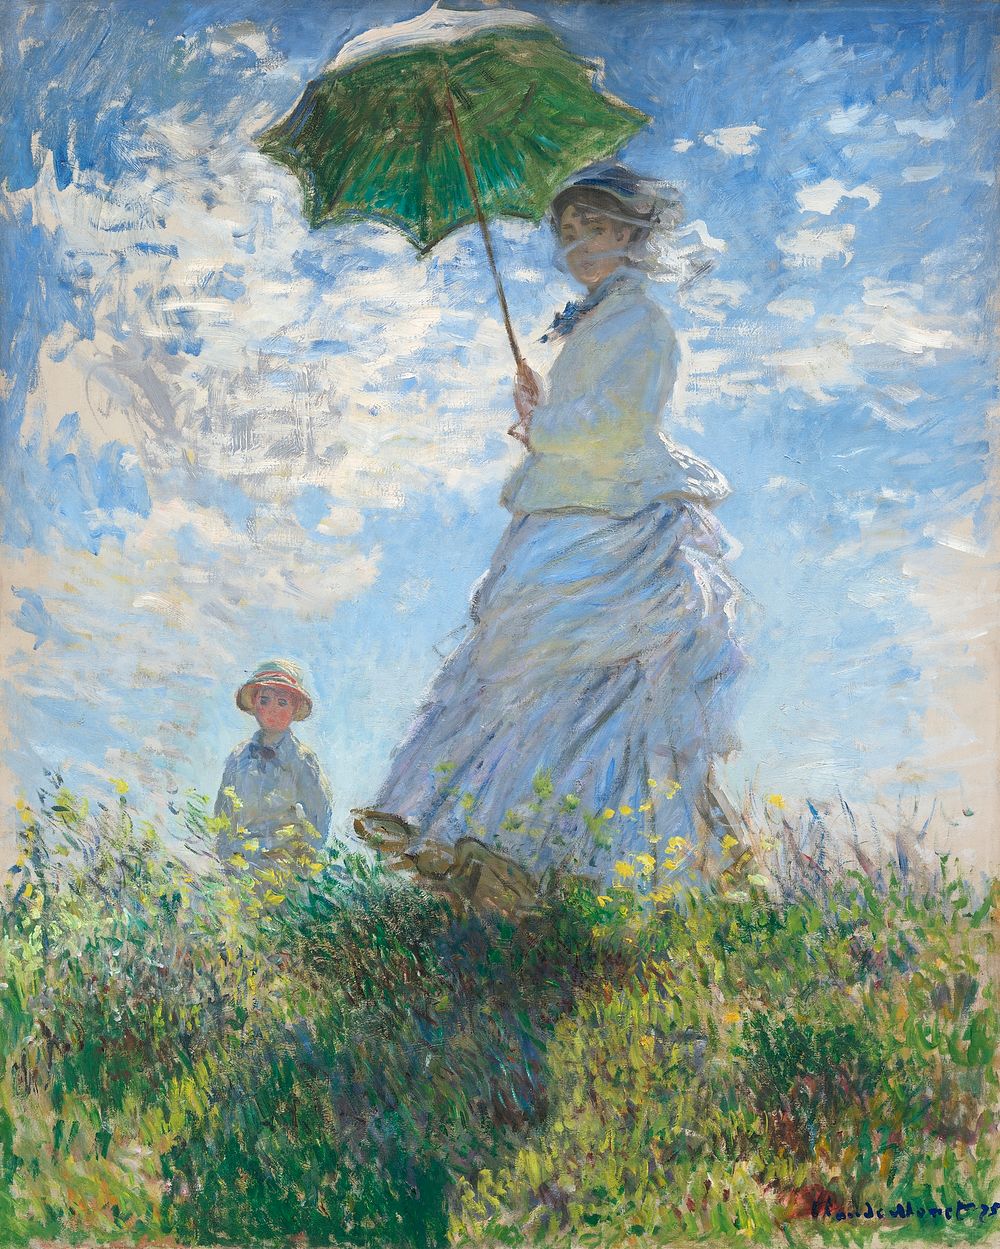 Claude Monet's Madame Monet and Her Son (1875), woman with a Parasol. Famous painting, original from the National Gallery of…